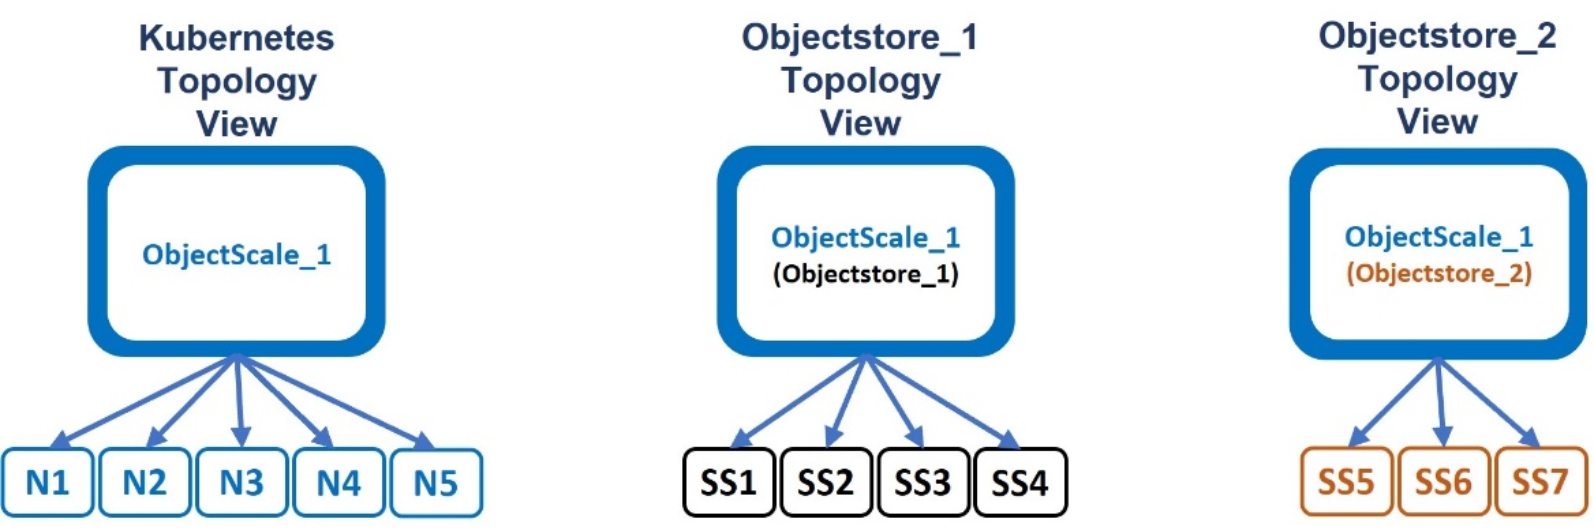 A diagram depicting an example for topology trees for two Objectstores.